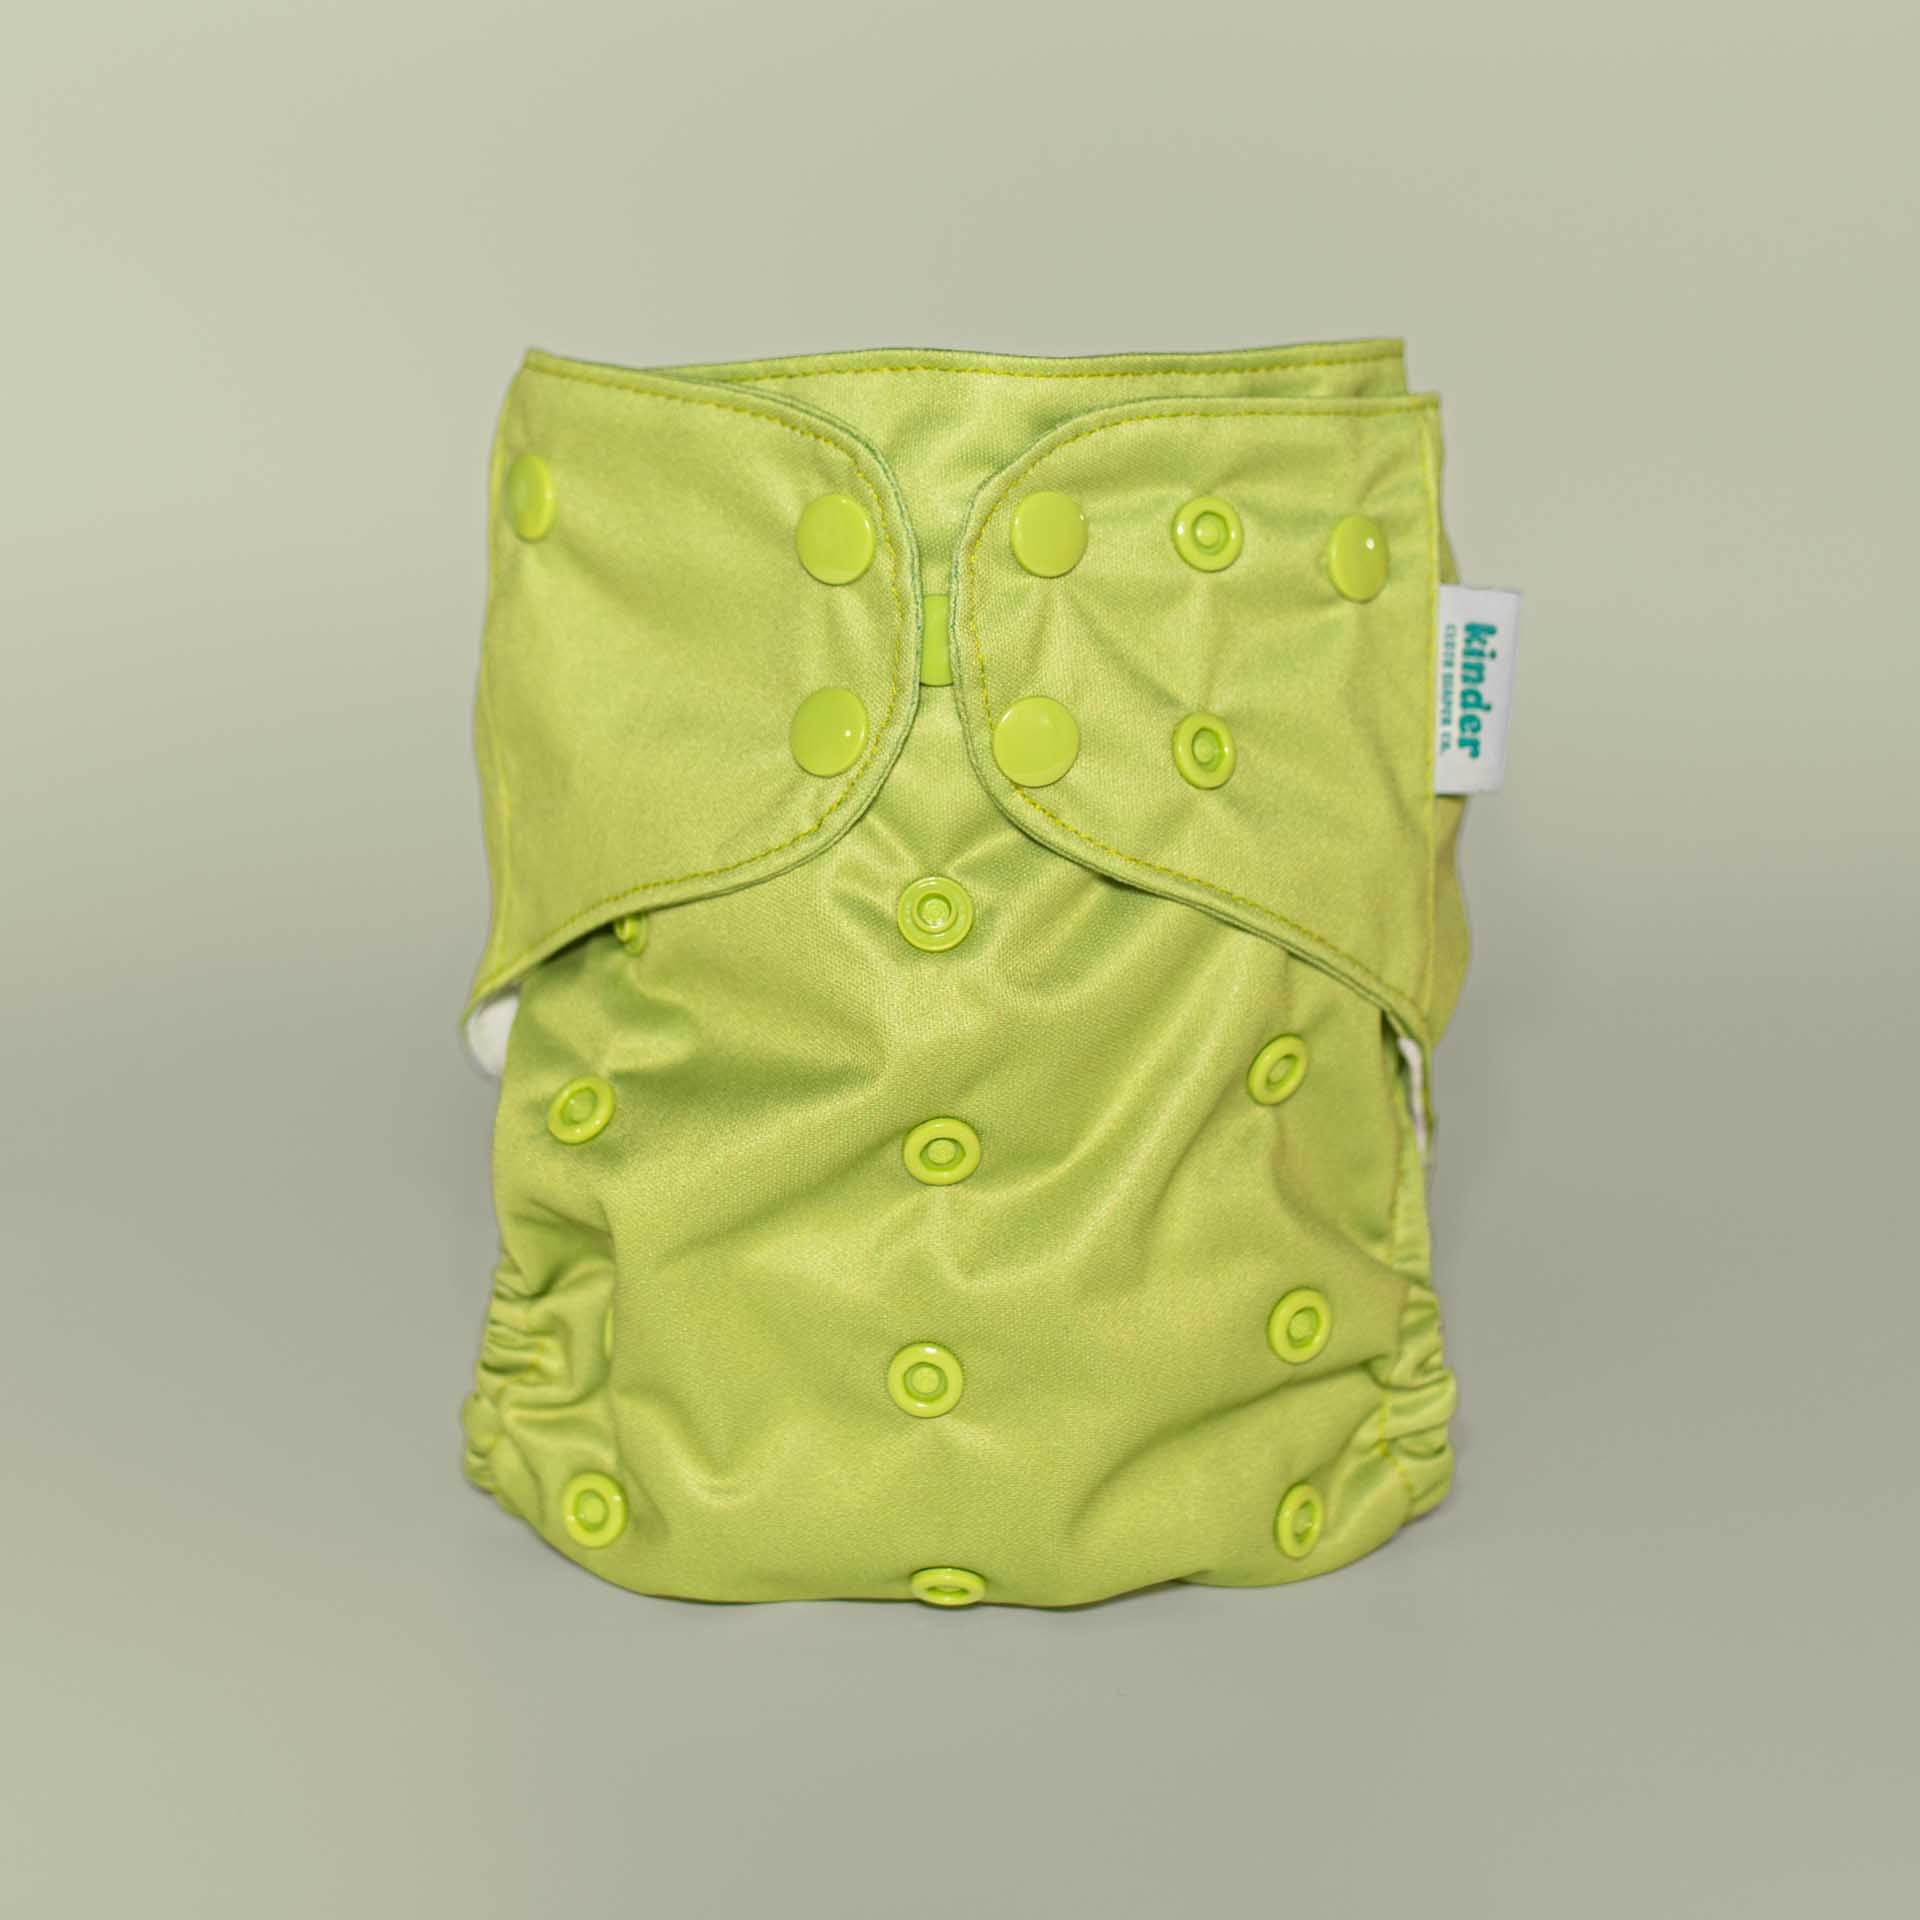 washable cloth diapers lime green solid awj athletic wicking jersey pocket style diapers